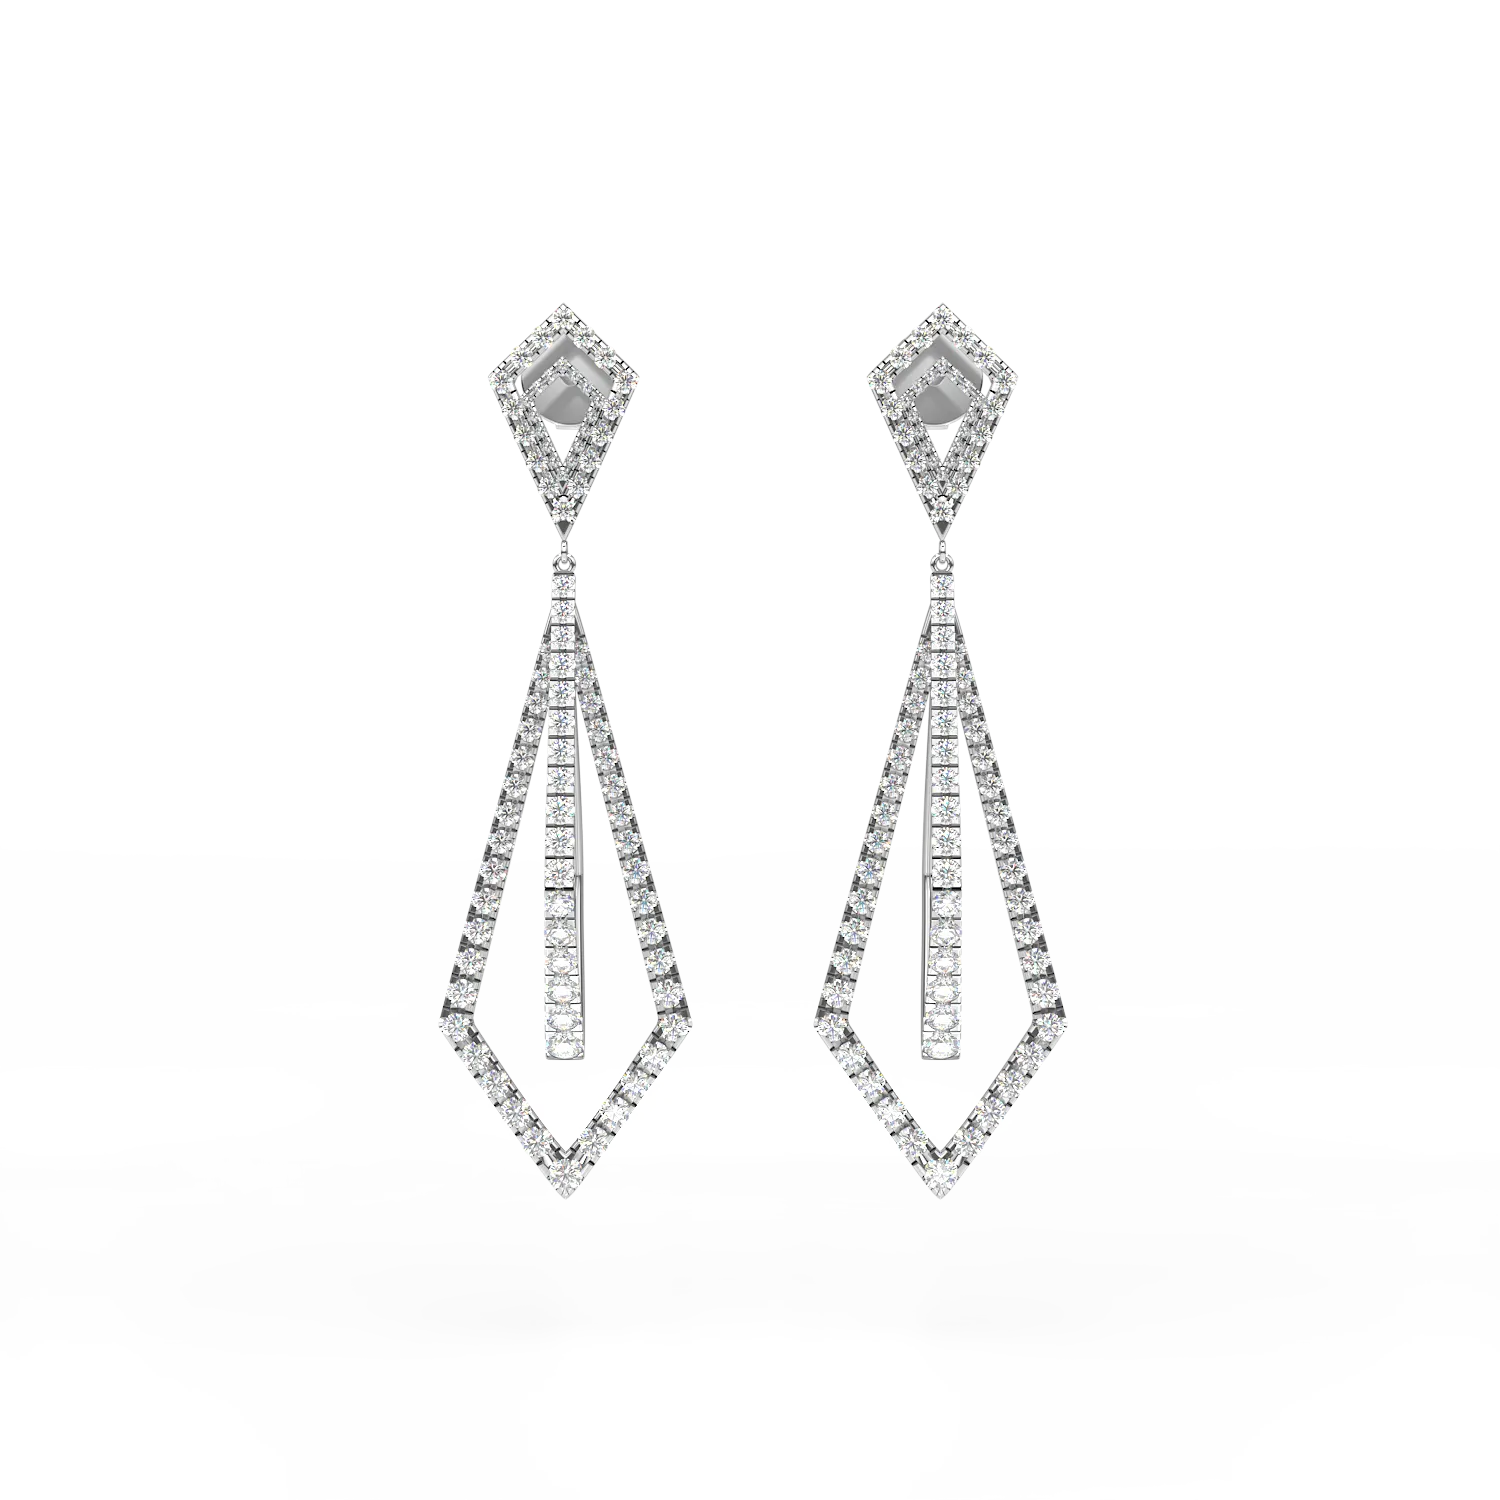 White gold earrings with 3.68ct diamonds